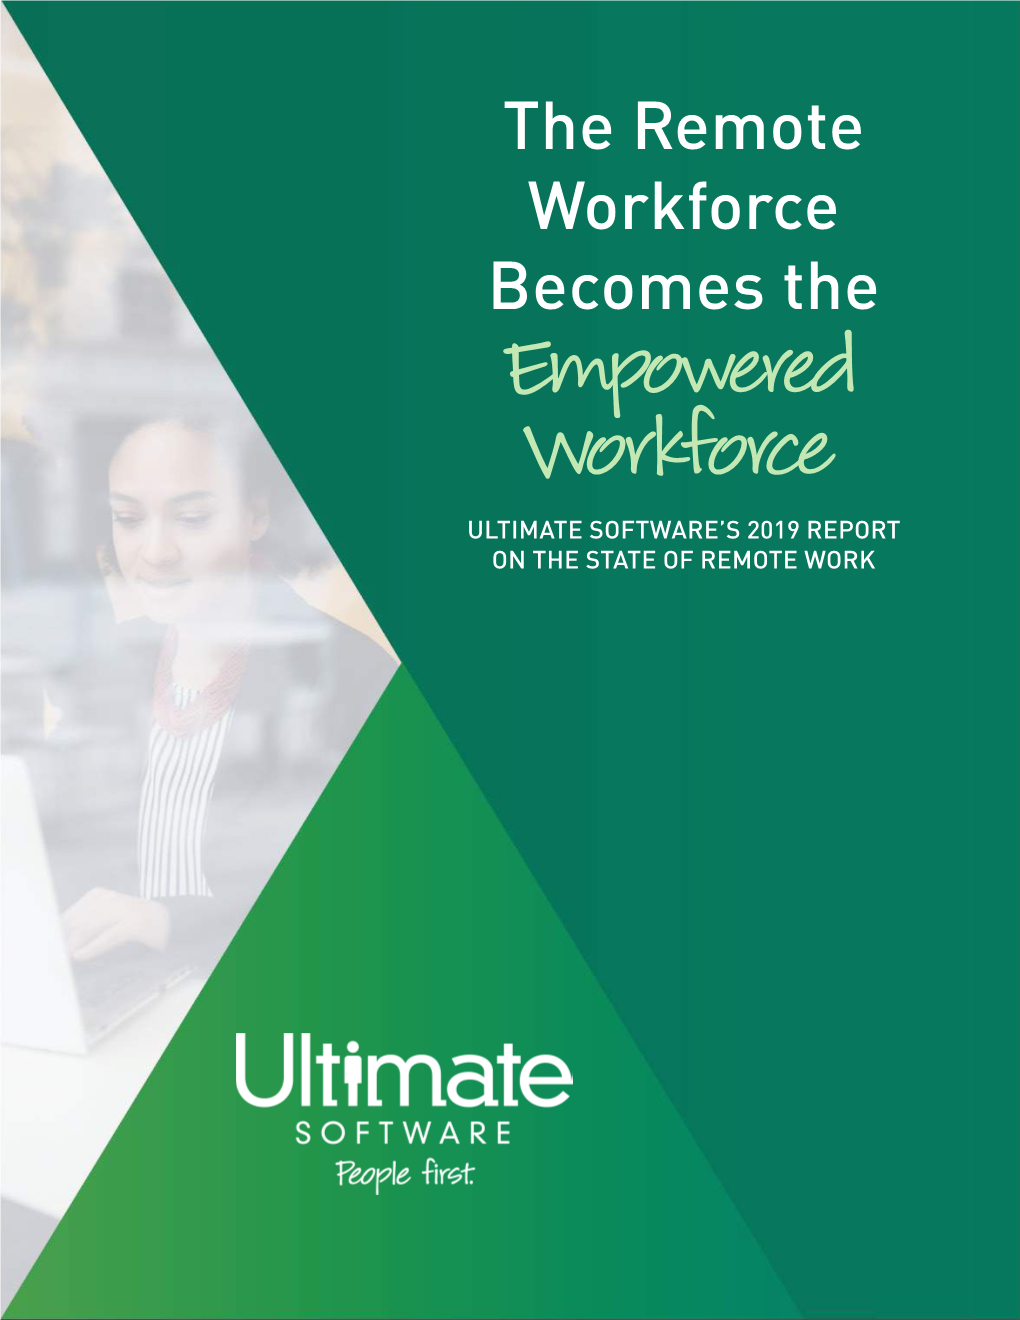 The Remote Workforce Becomes the Empowered Workforce ULTIMATE SOFTWARE’S 2019 REPORT on the STATE of REMOTE WORK